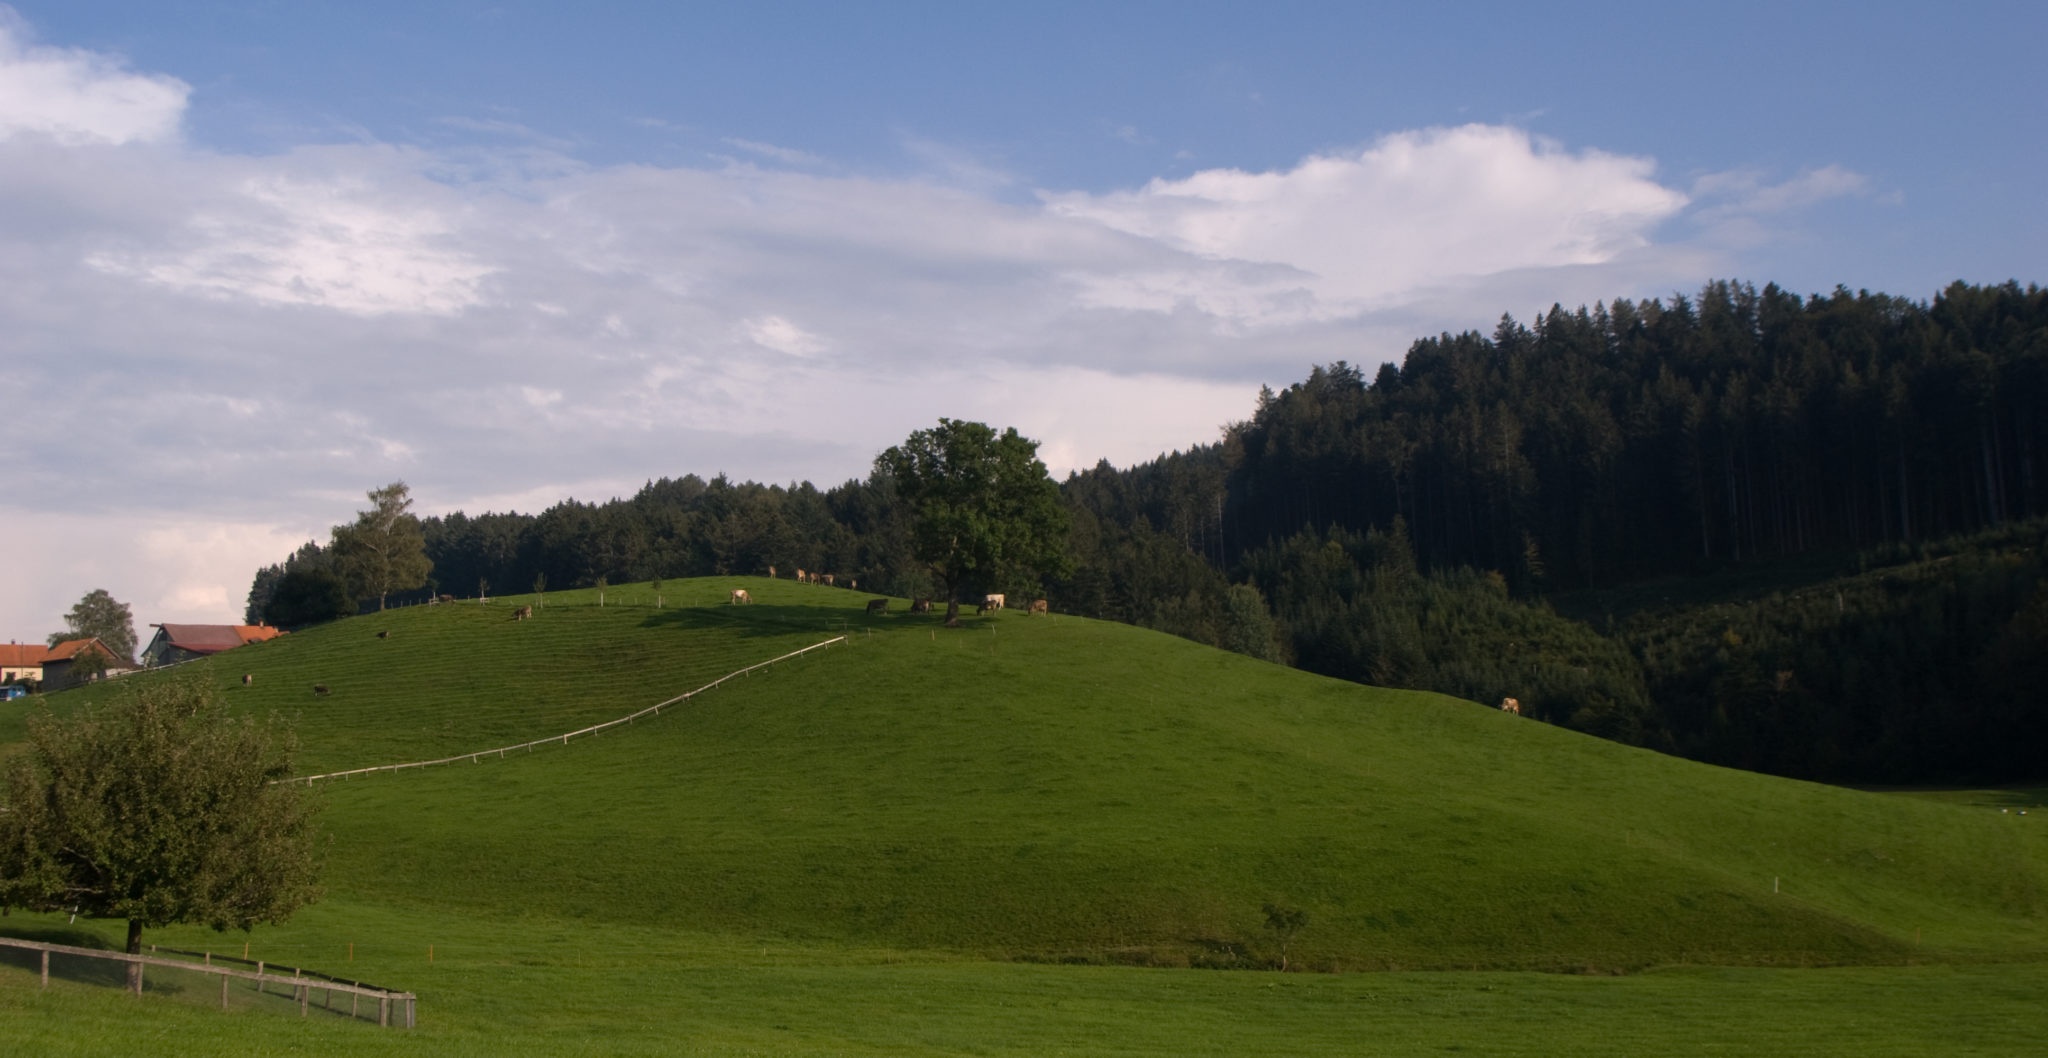 Etude with hills and cows